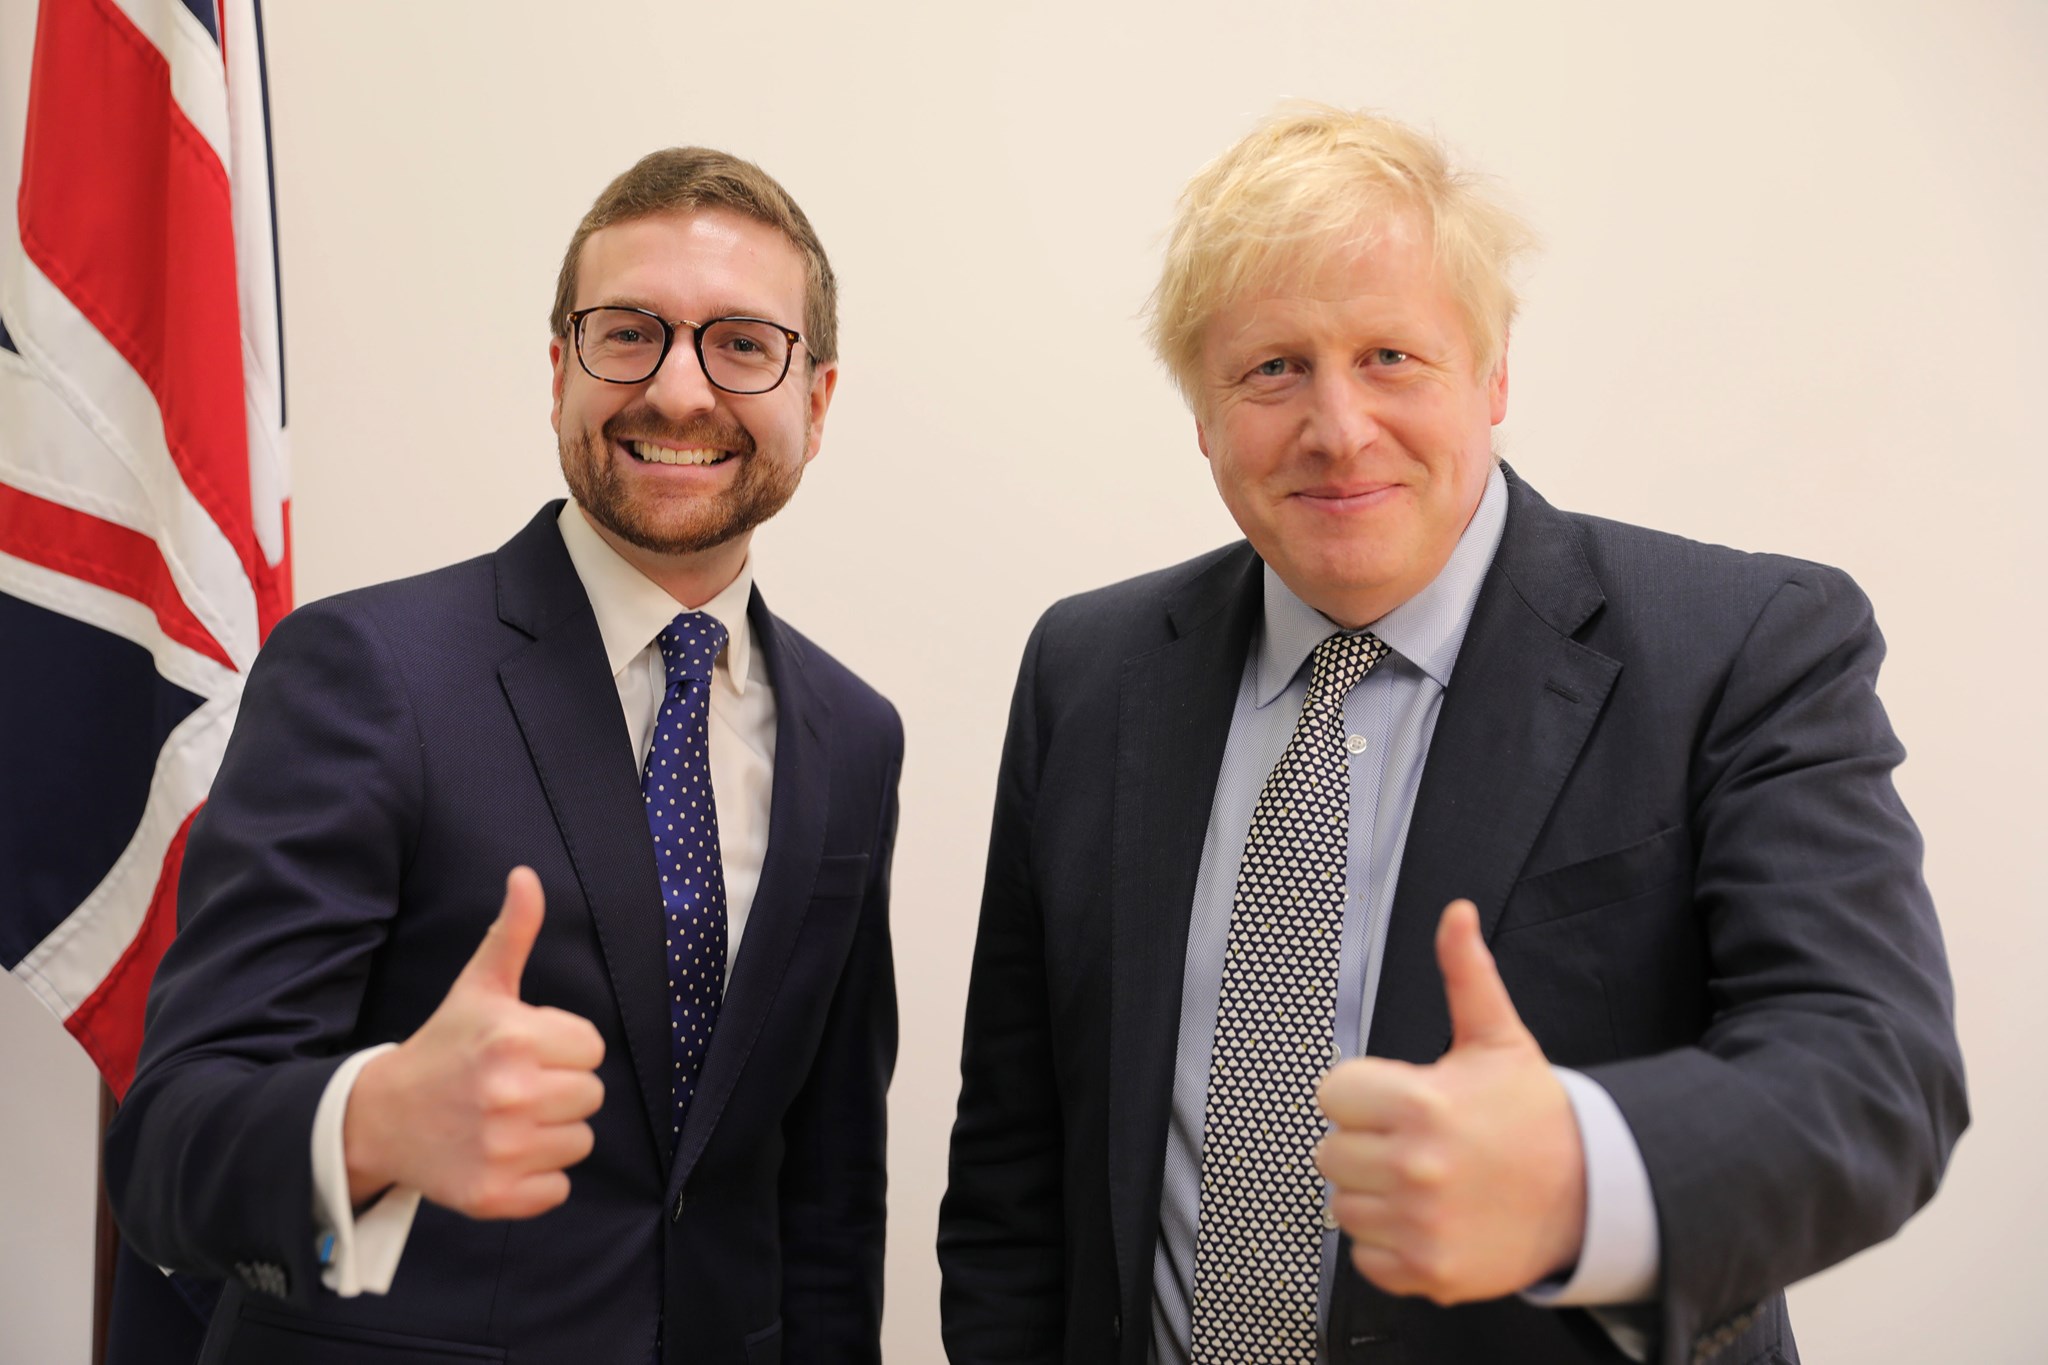 Alexander Stafford and our Boris, the Prime Minister